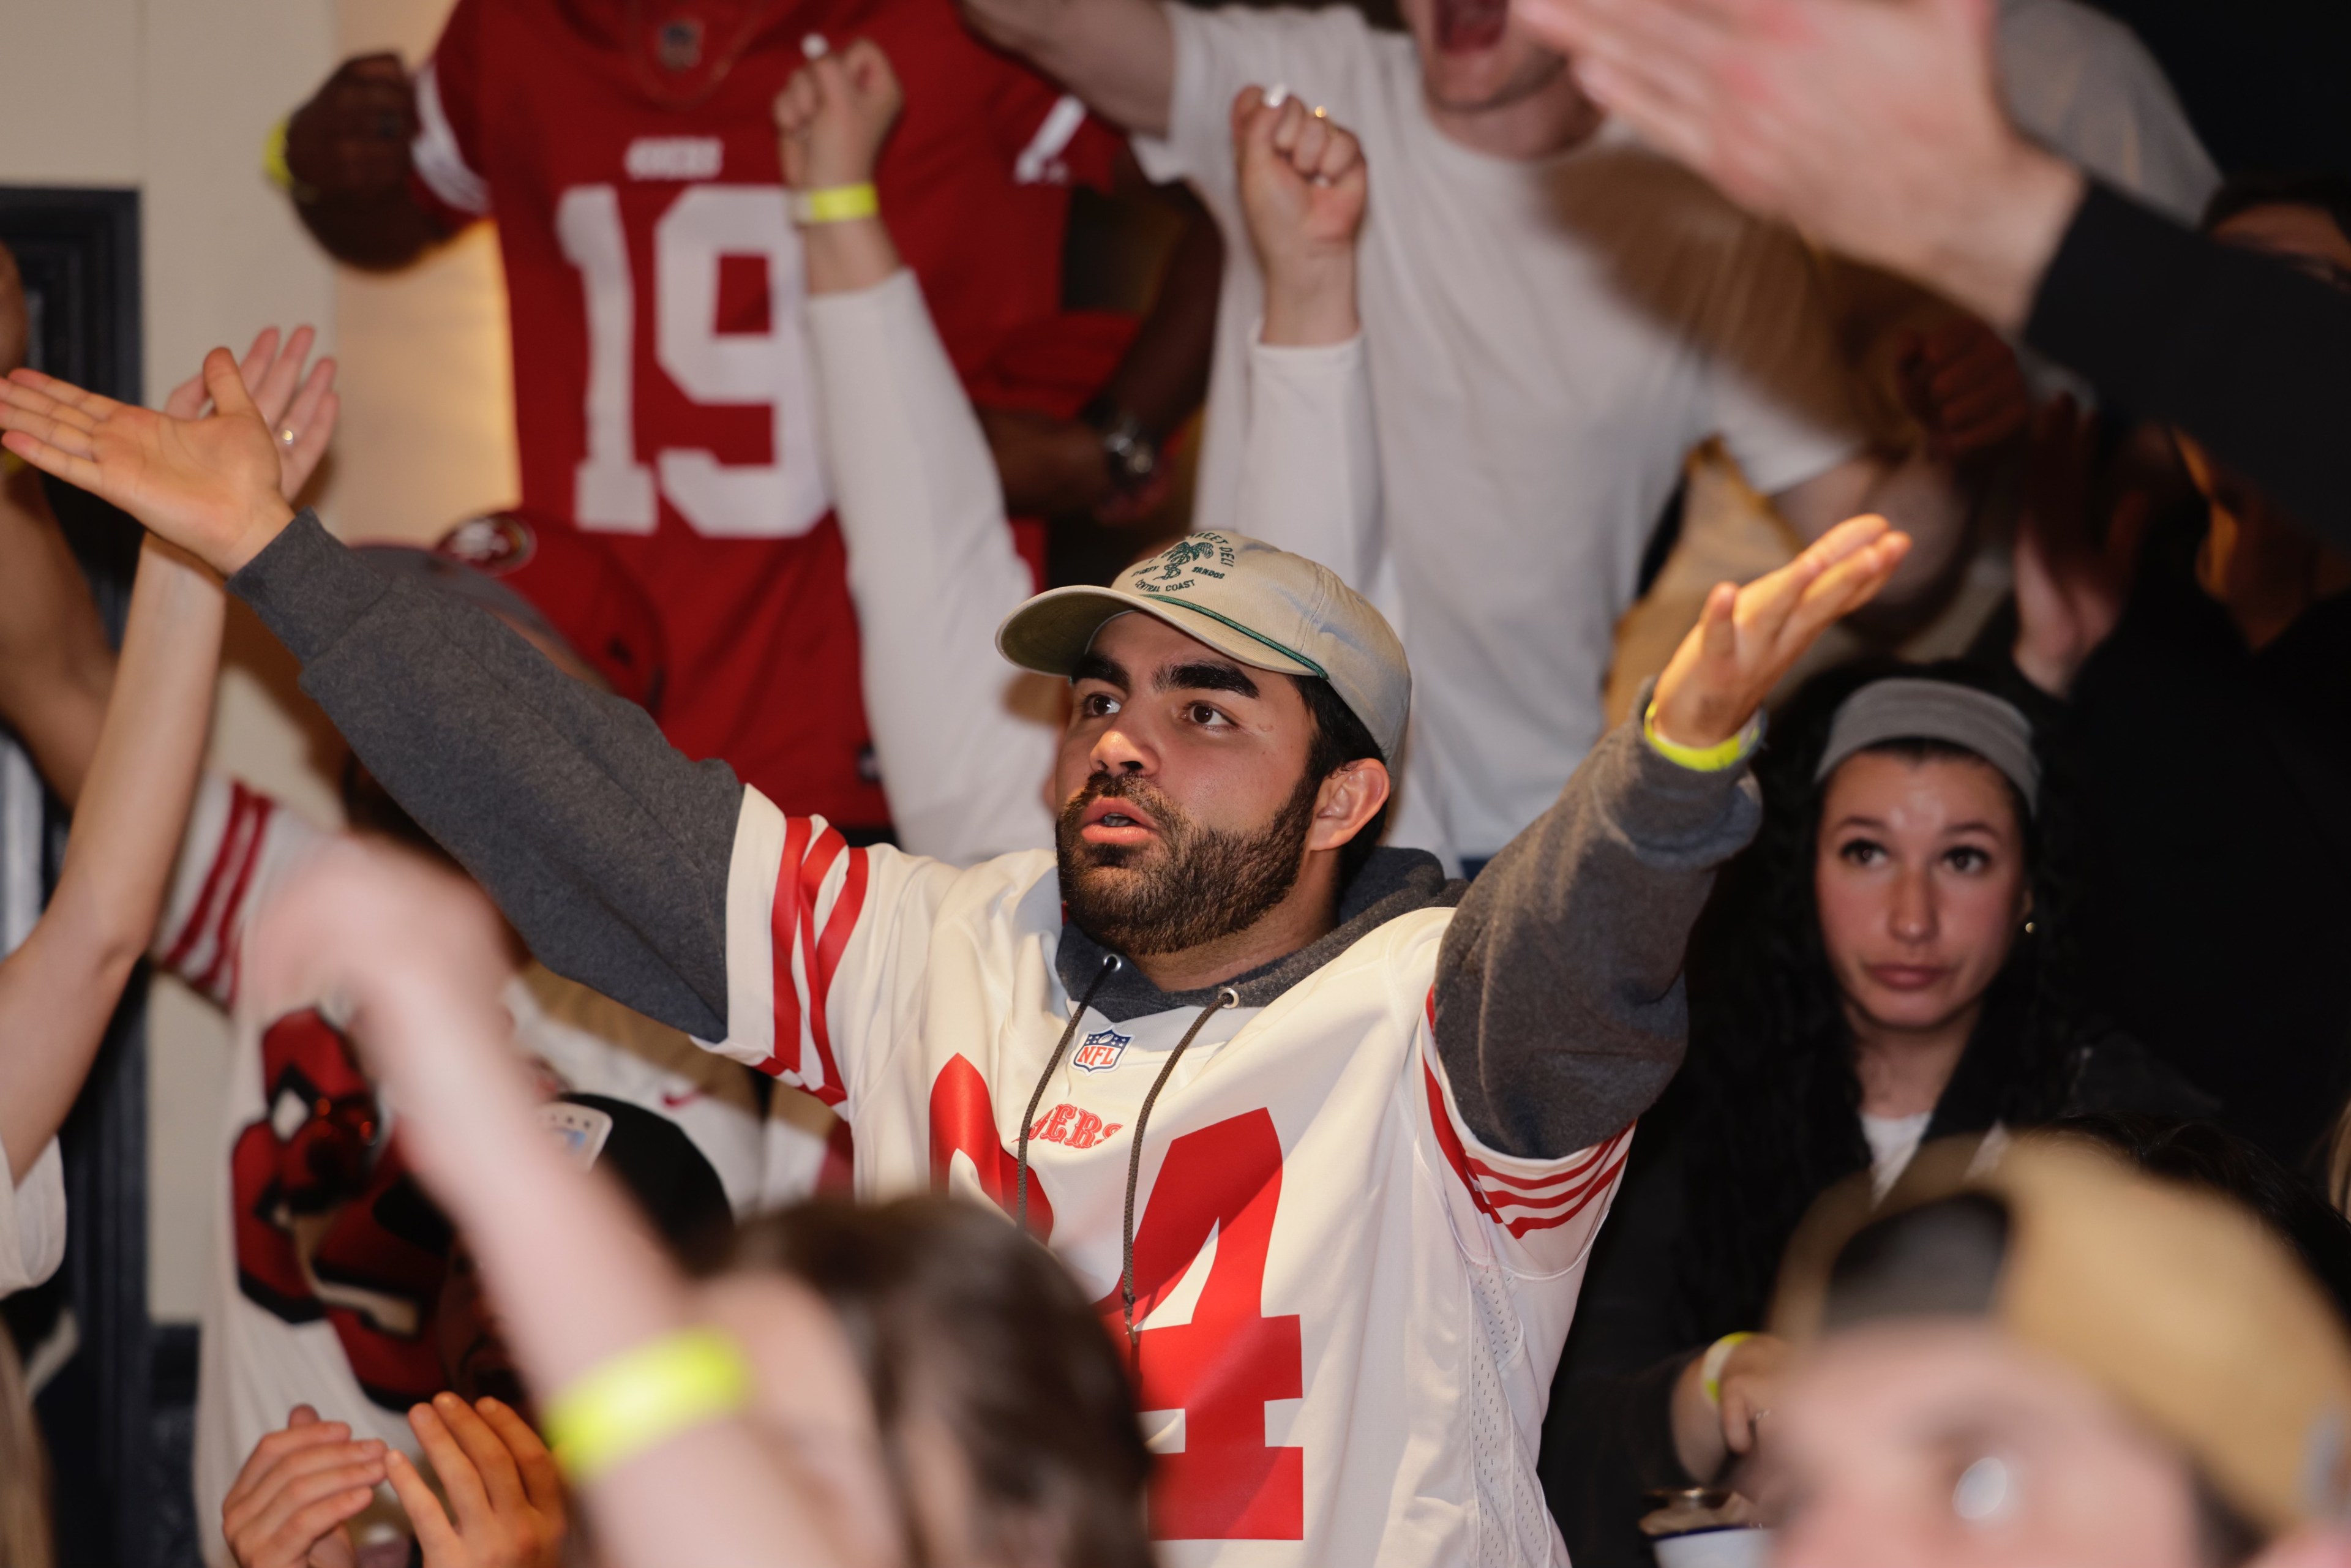 A crowd with raised hands; a man in a football jersey is in focus, signaling with serious expression.